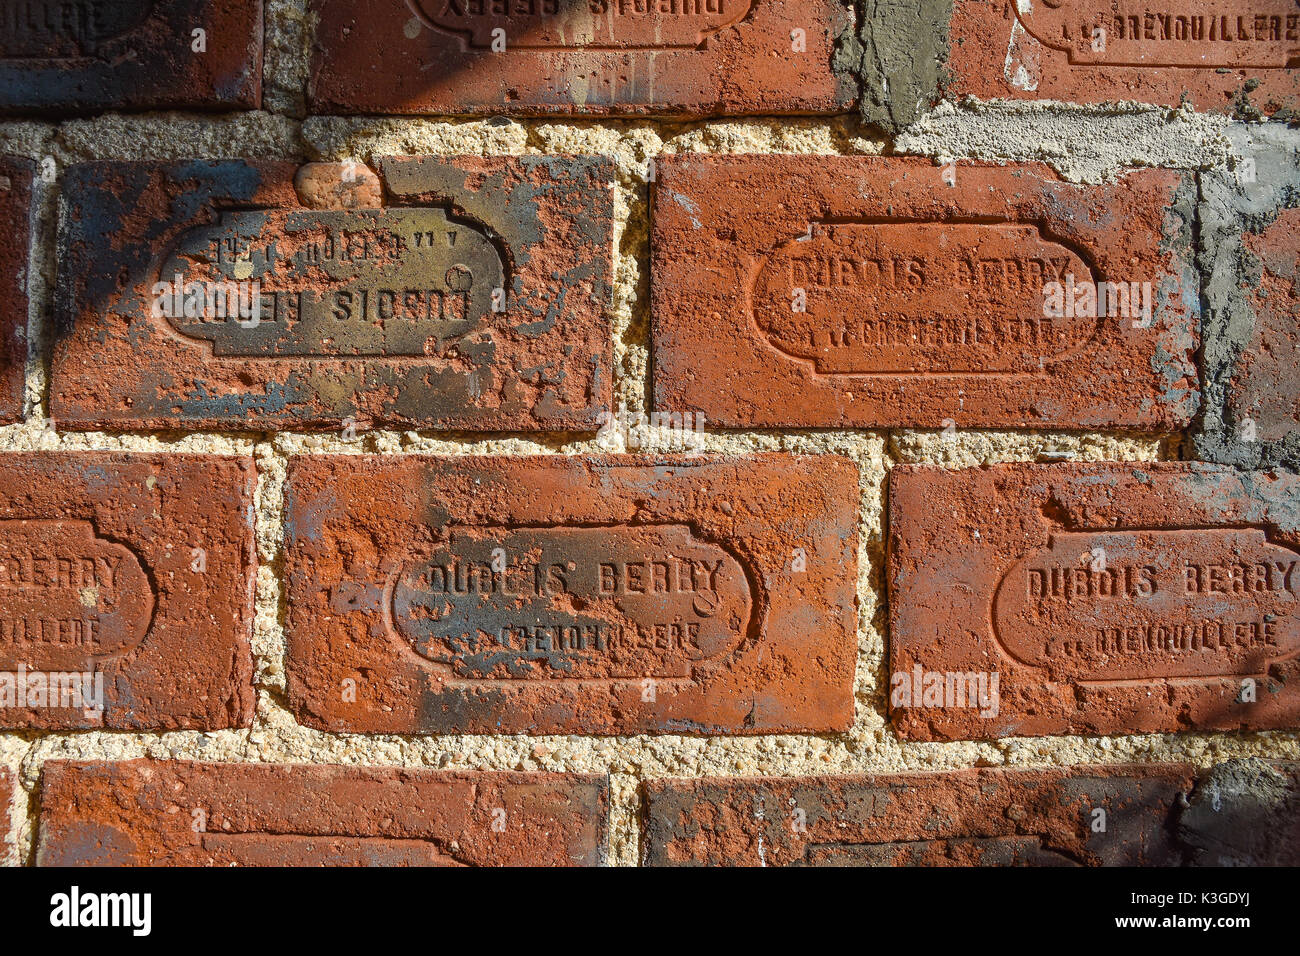 Maker's name moulded into fired bricks - France. Stock Photo